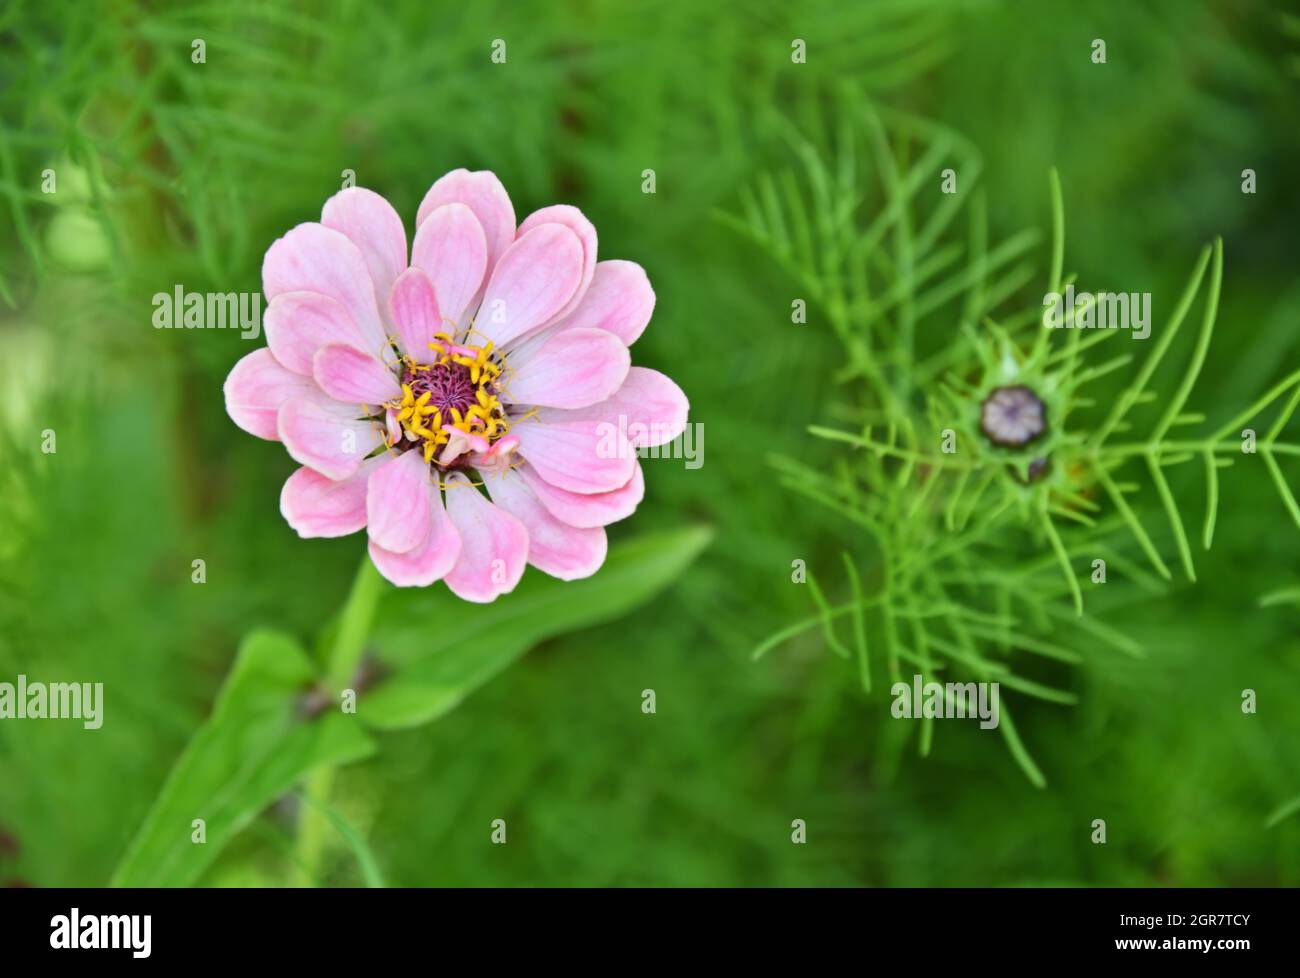 A small delicate pink, blooming zinnia plant, and a budding cosmos plant growing beside the zinnia in a green background. Stock Photo